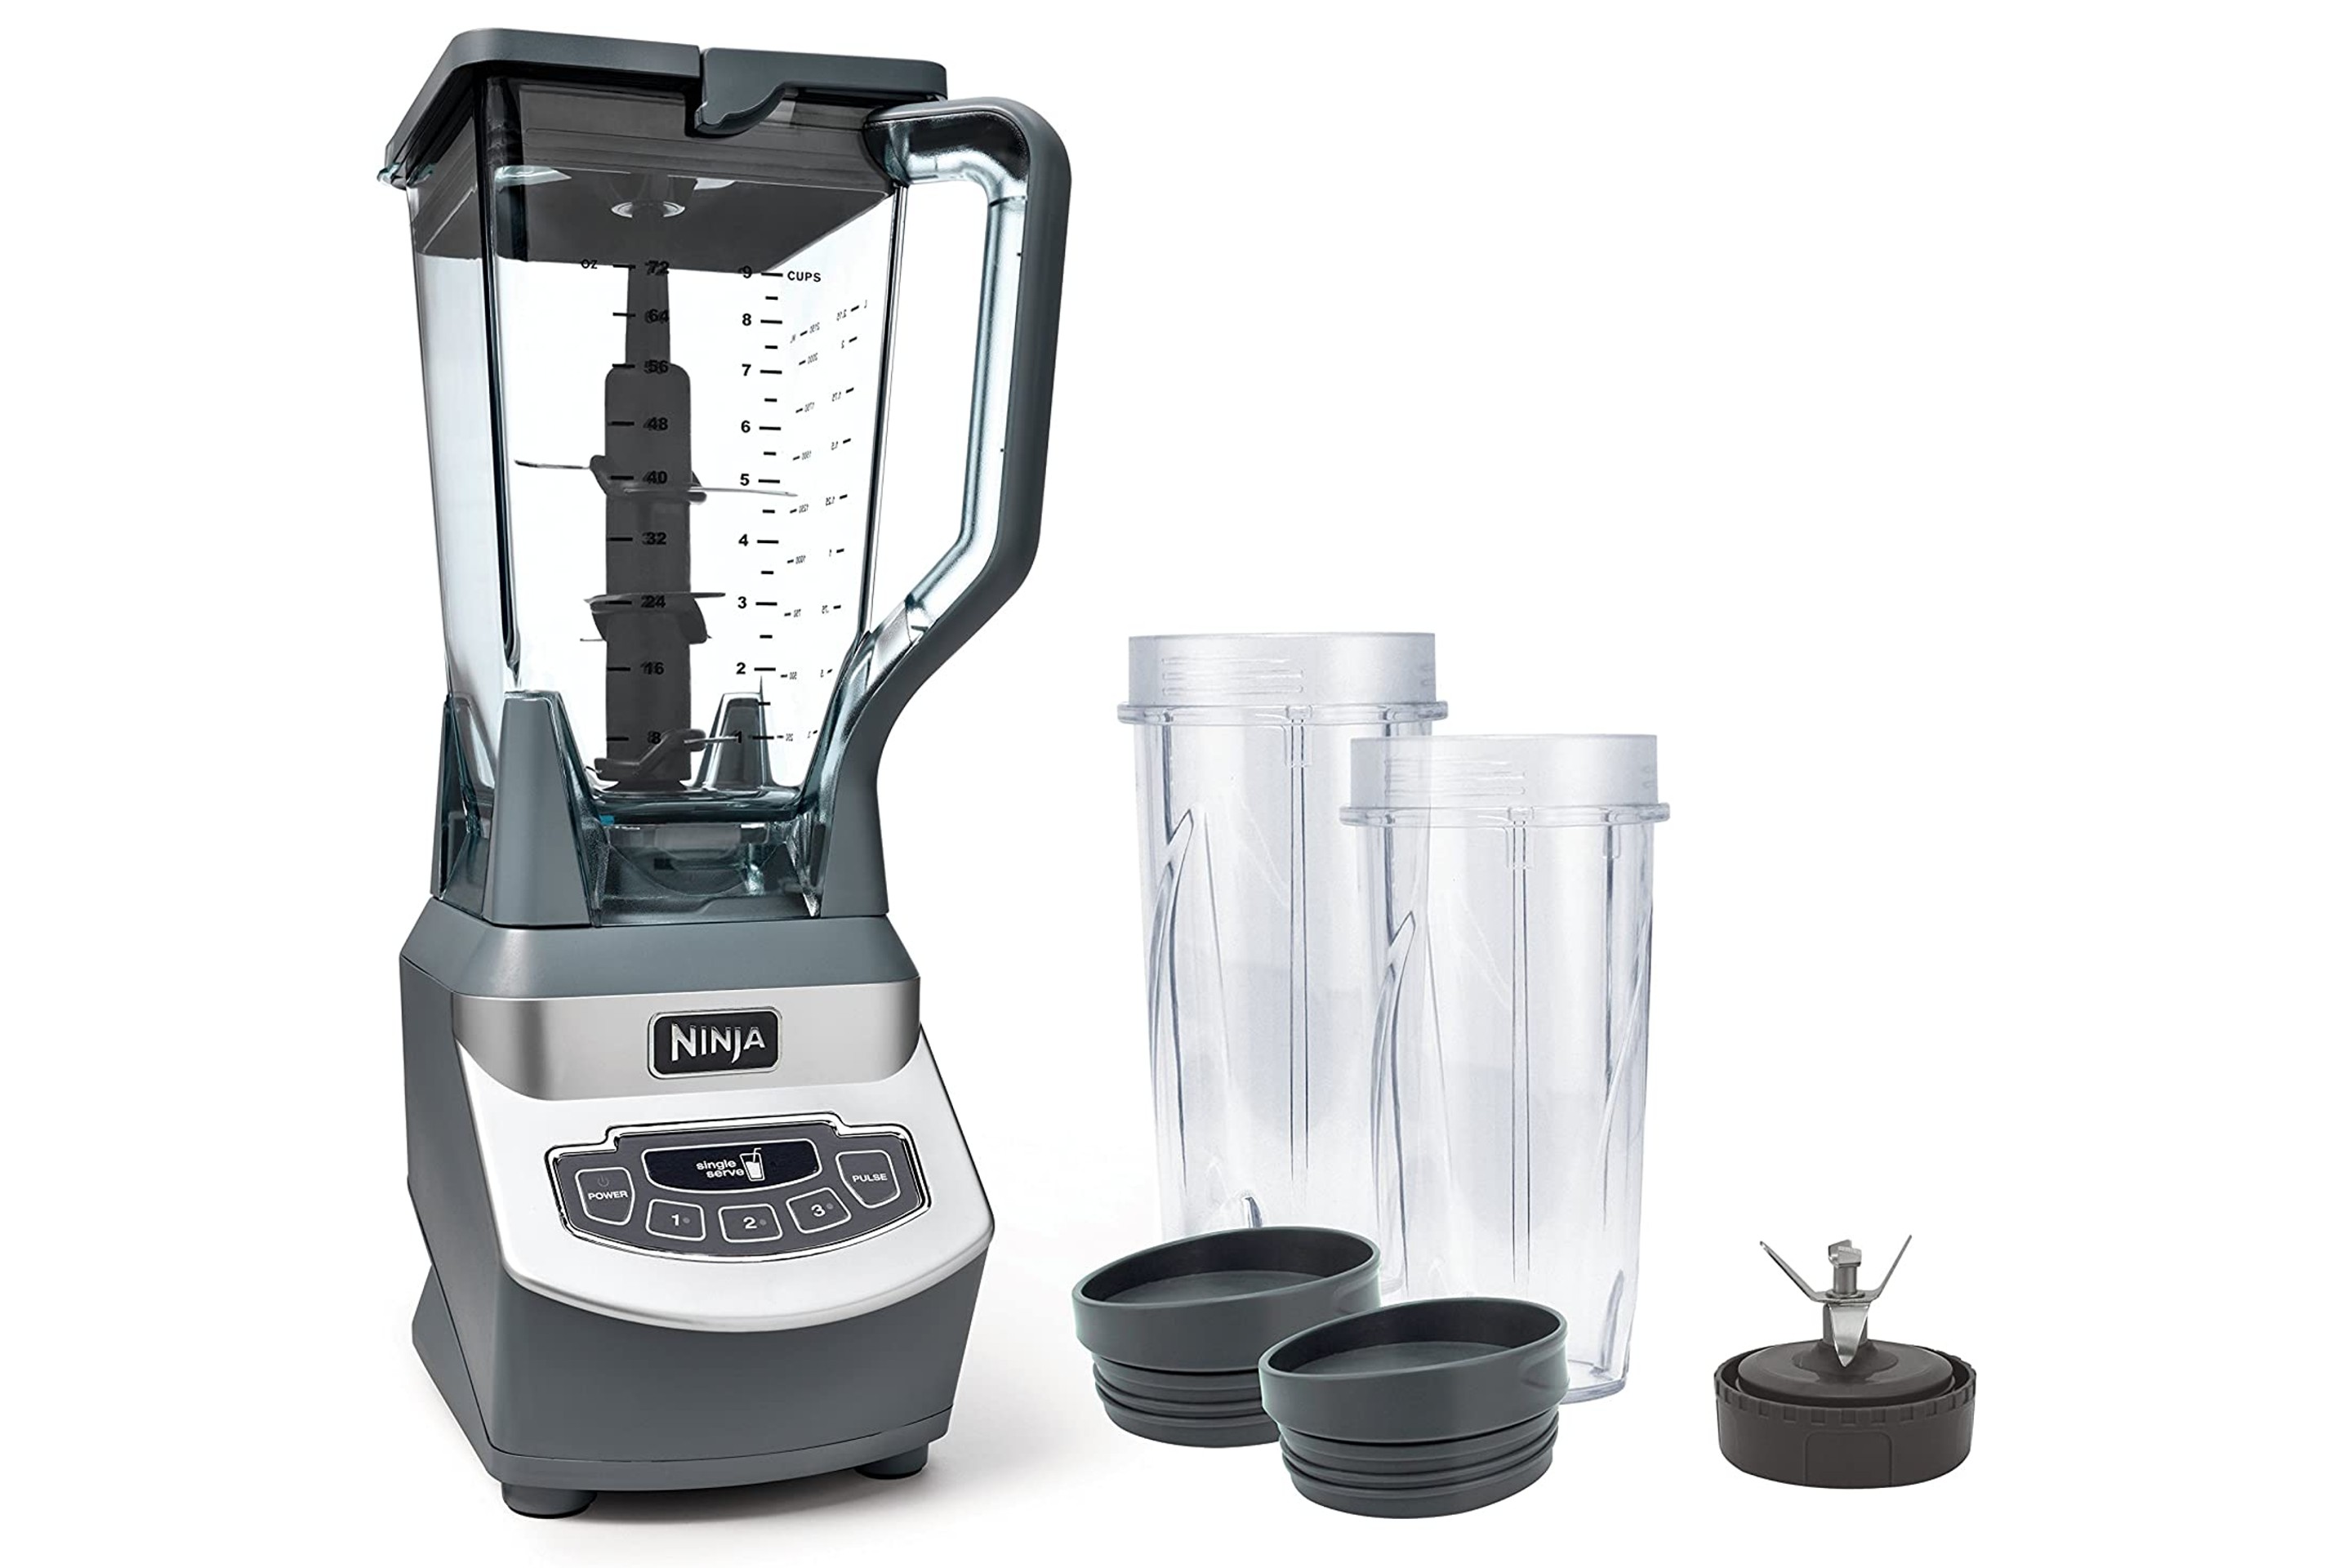  Ninja QB3001SS Ninja Fit Compact Personal Blender, for Shakes,  Smoothies, Food Prep, and Frozen Blending, 700-Watt Base and (2) 16-oz.  Cups & Spout Lids, Black: Home & Kitchen